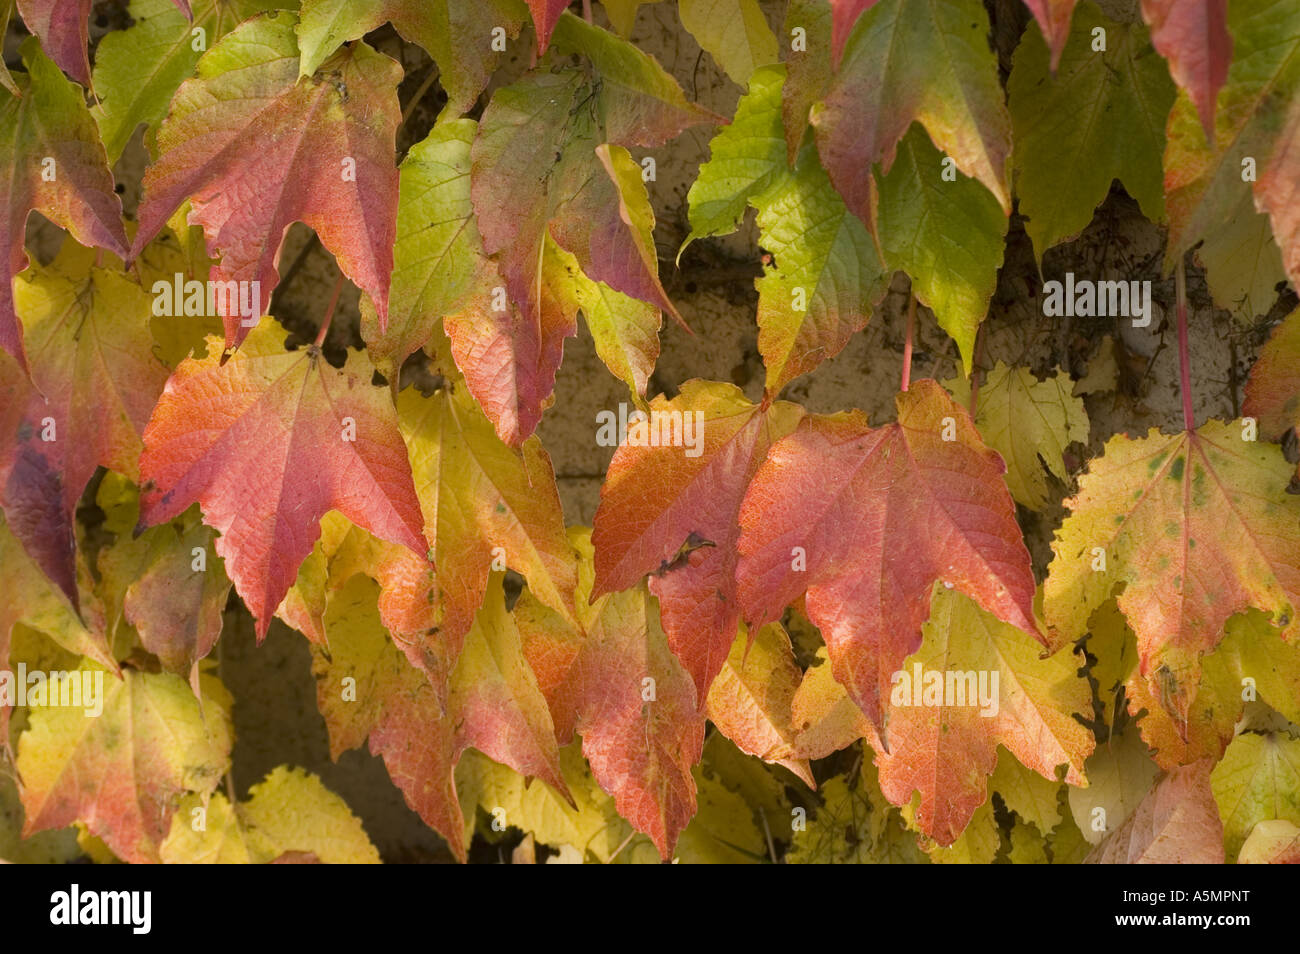 Yellow red leaves of of Japanese Ivy or Boston ivy Vitaceae Parthenocissus tricuspidata Veitchii, Autumn, Fall Stock Photo